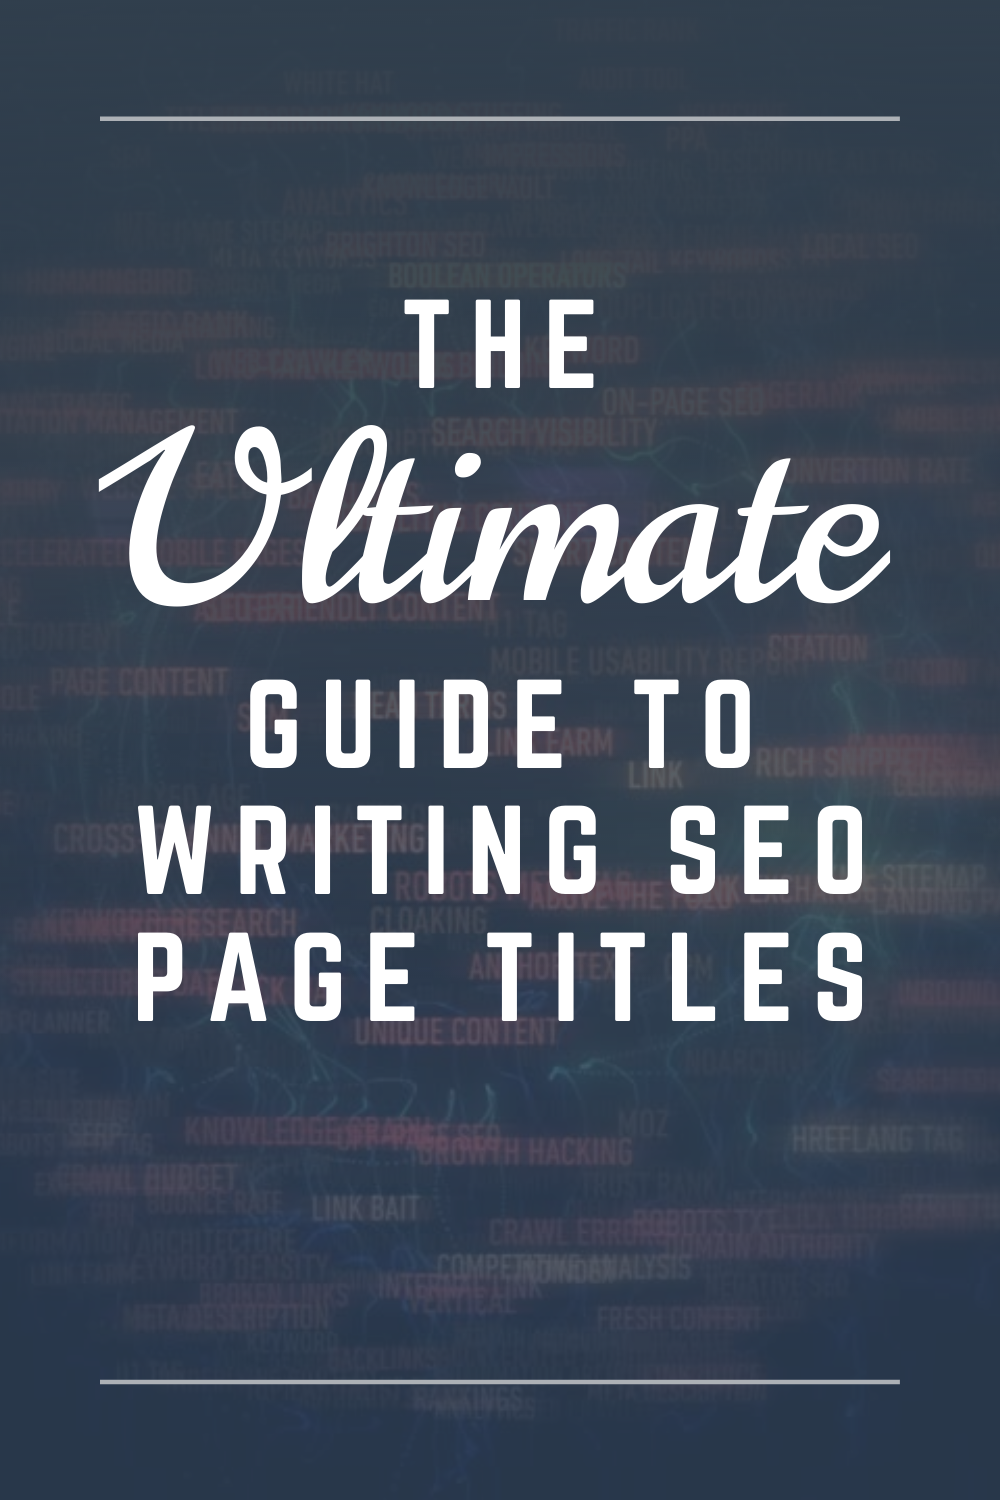 The ultimate guide to writing SEO page titles by WebWiskee